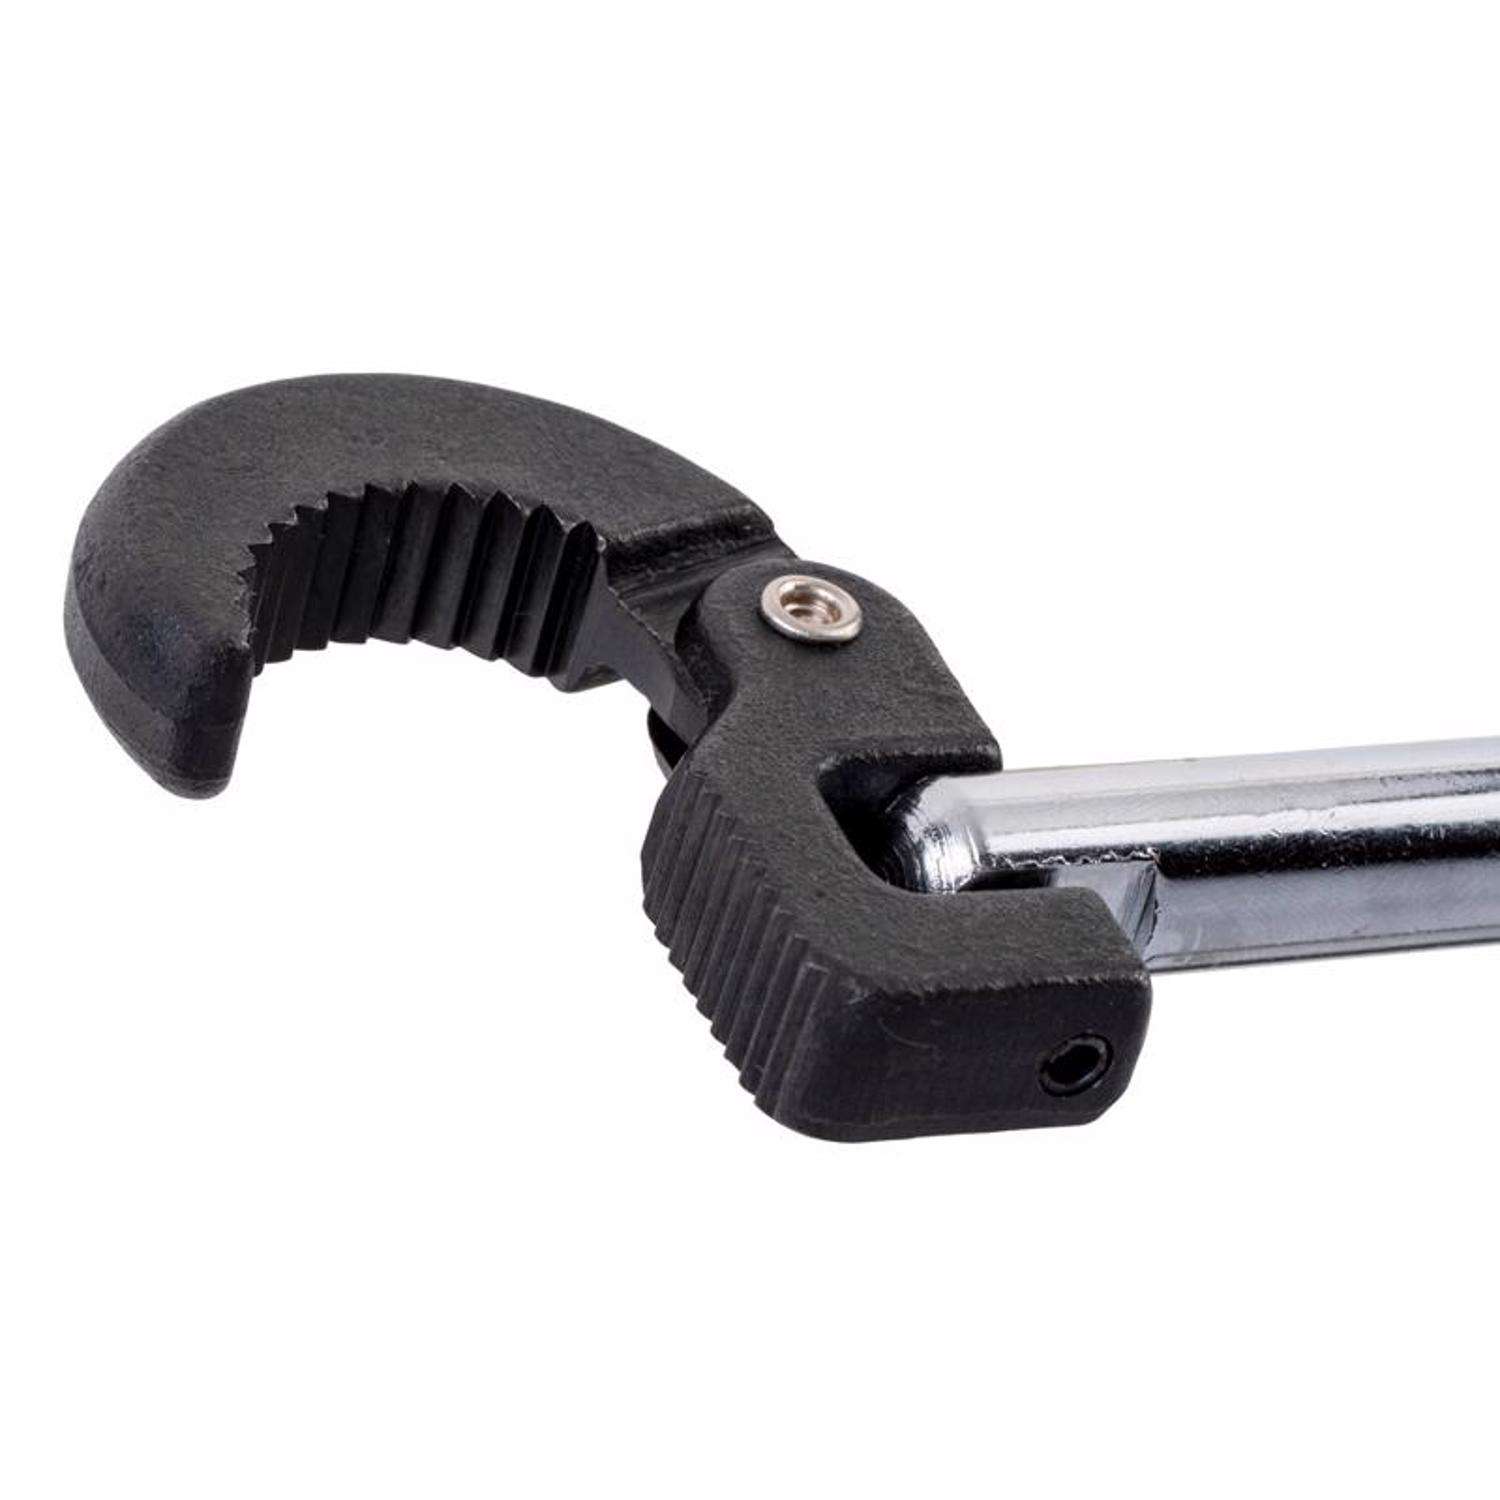 Ace Pipe Wrench 18 in. L 1 pc - Ace Hardware